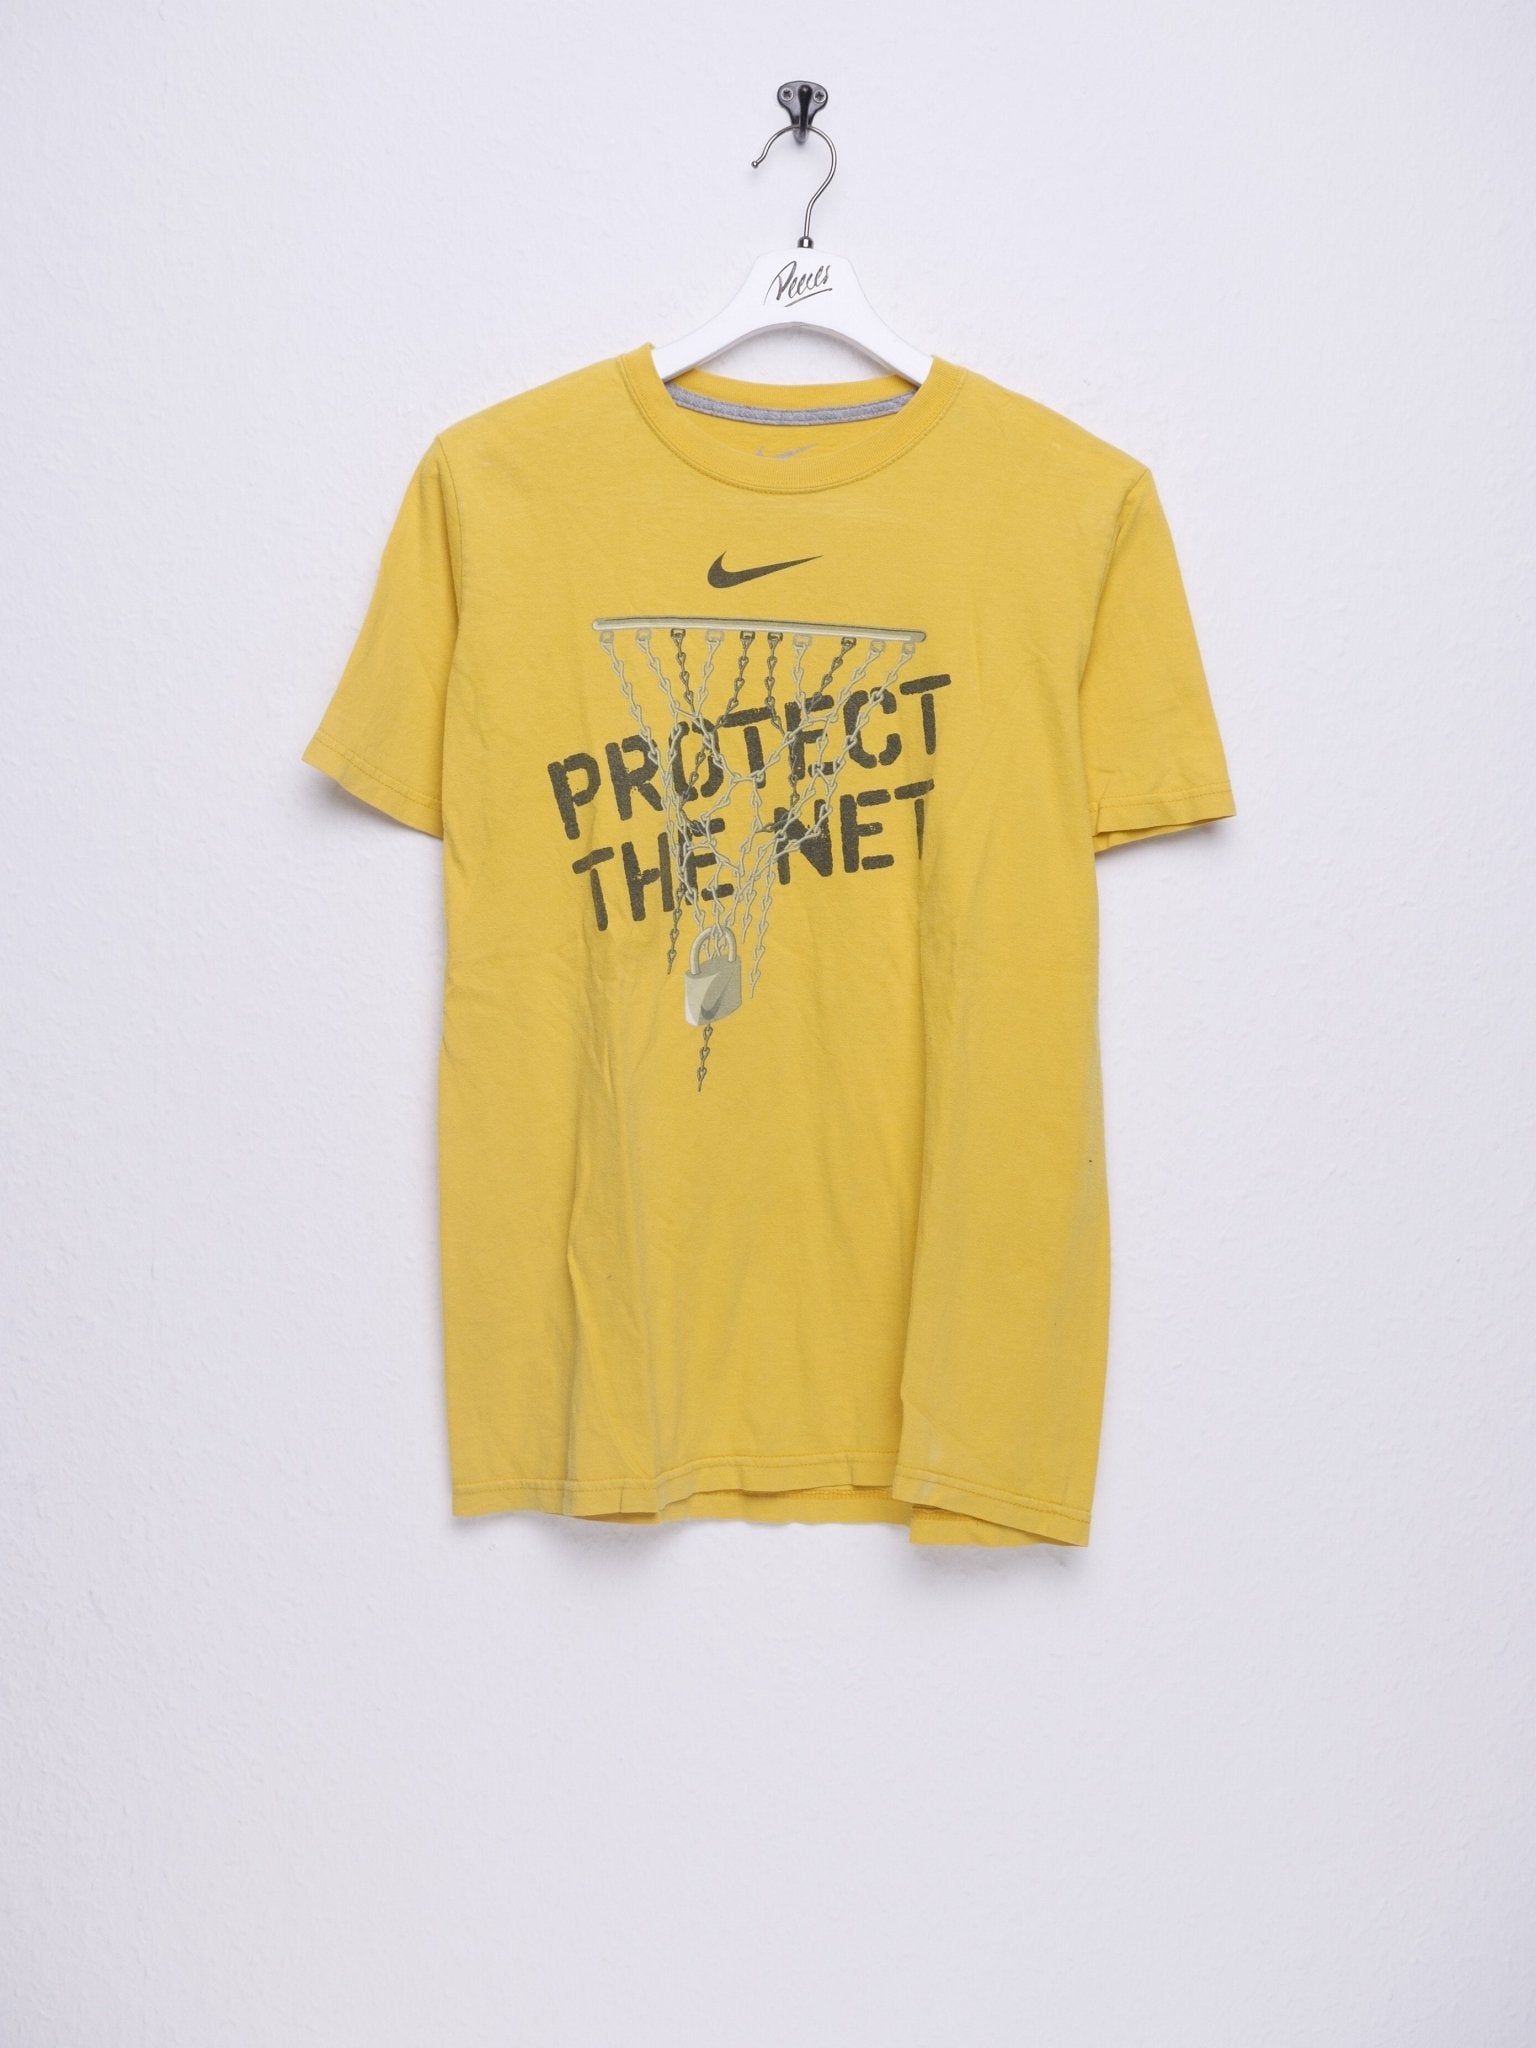 nike Protect the Net printed middle Swoosh Shirt - Peeces